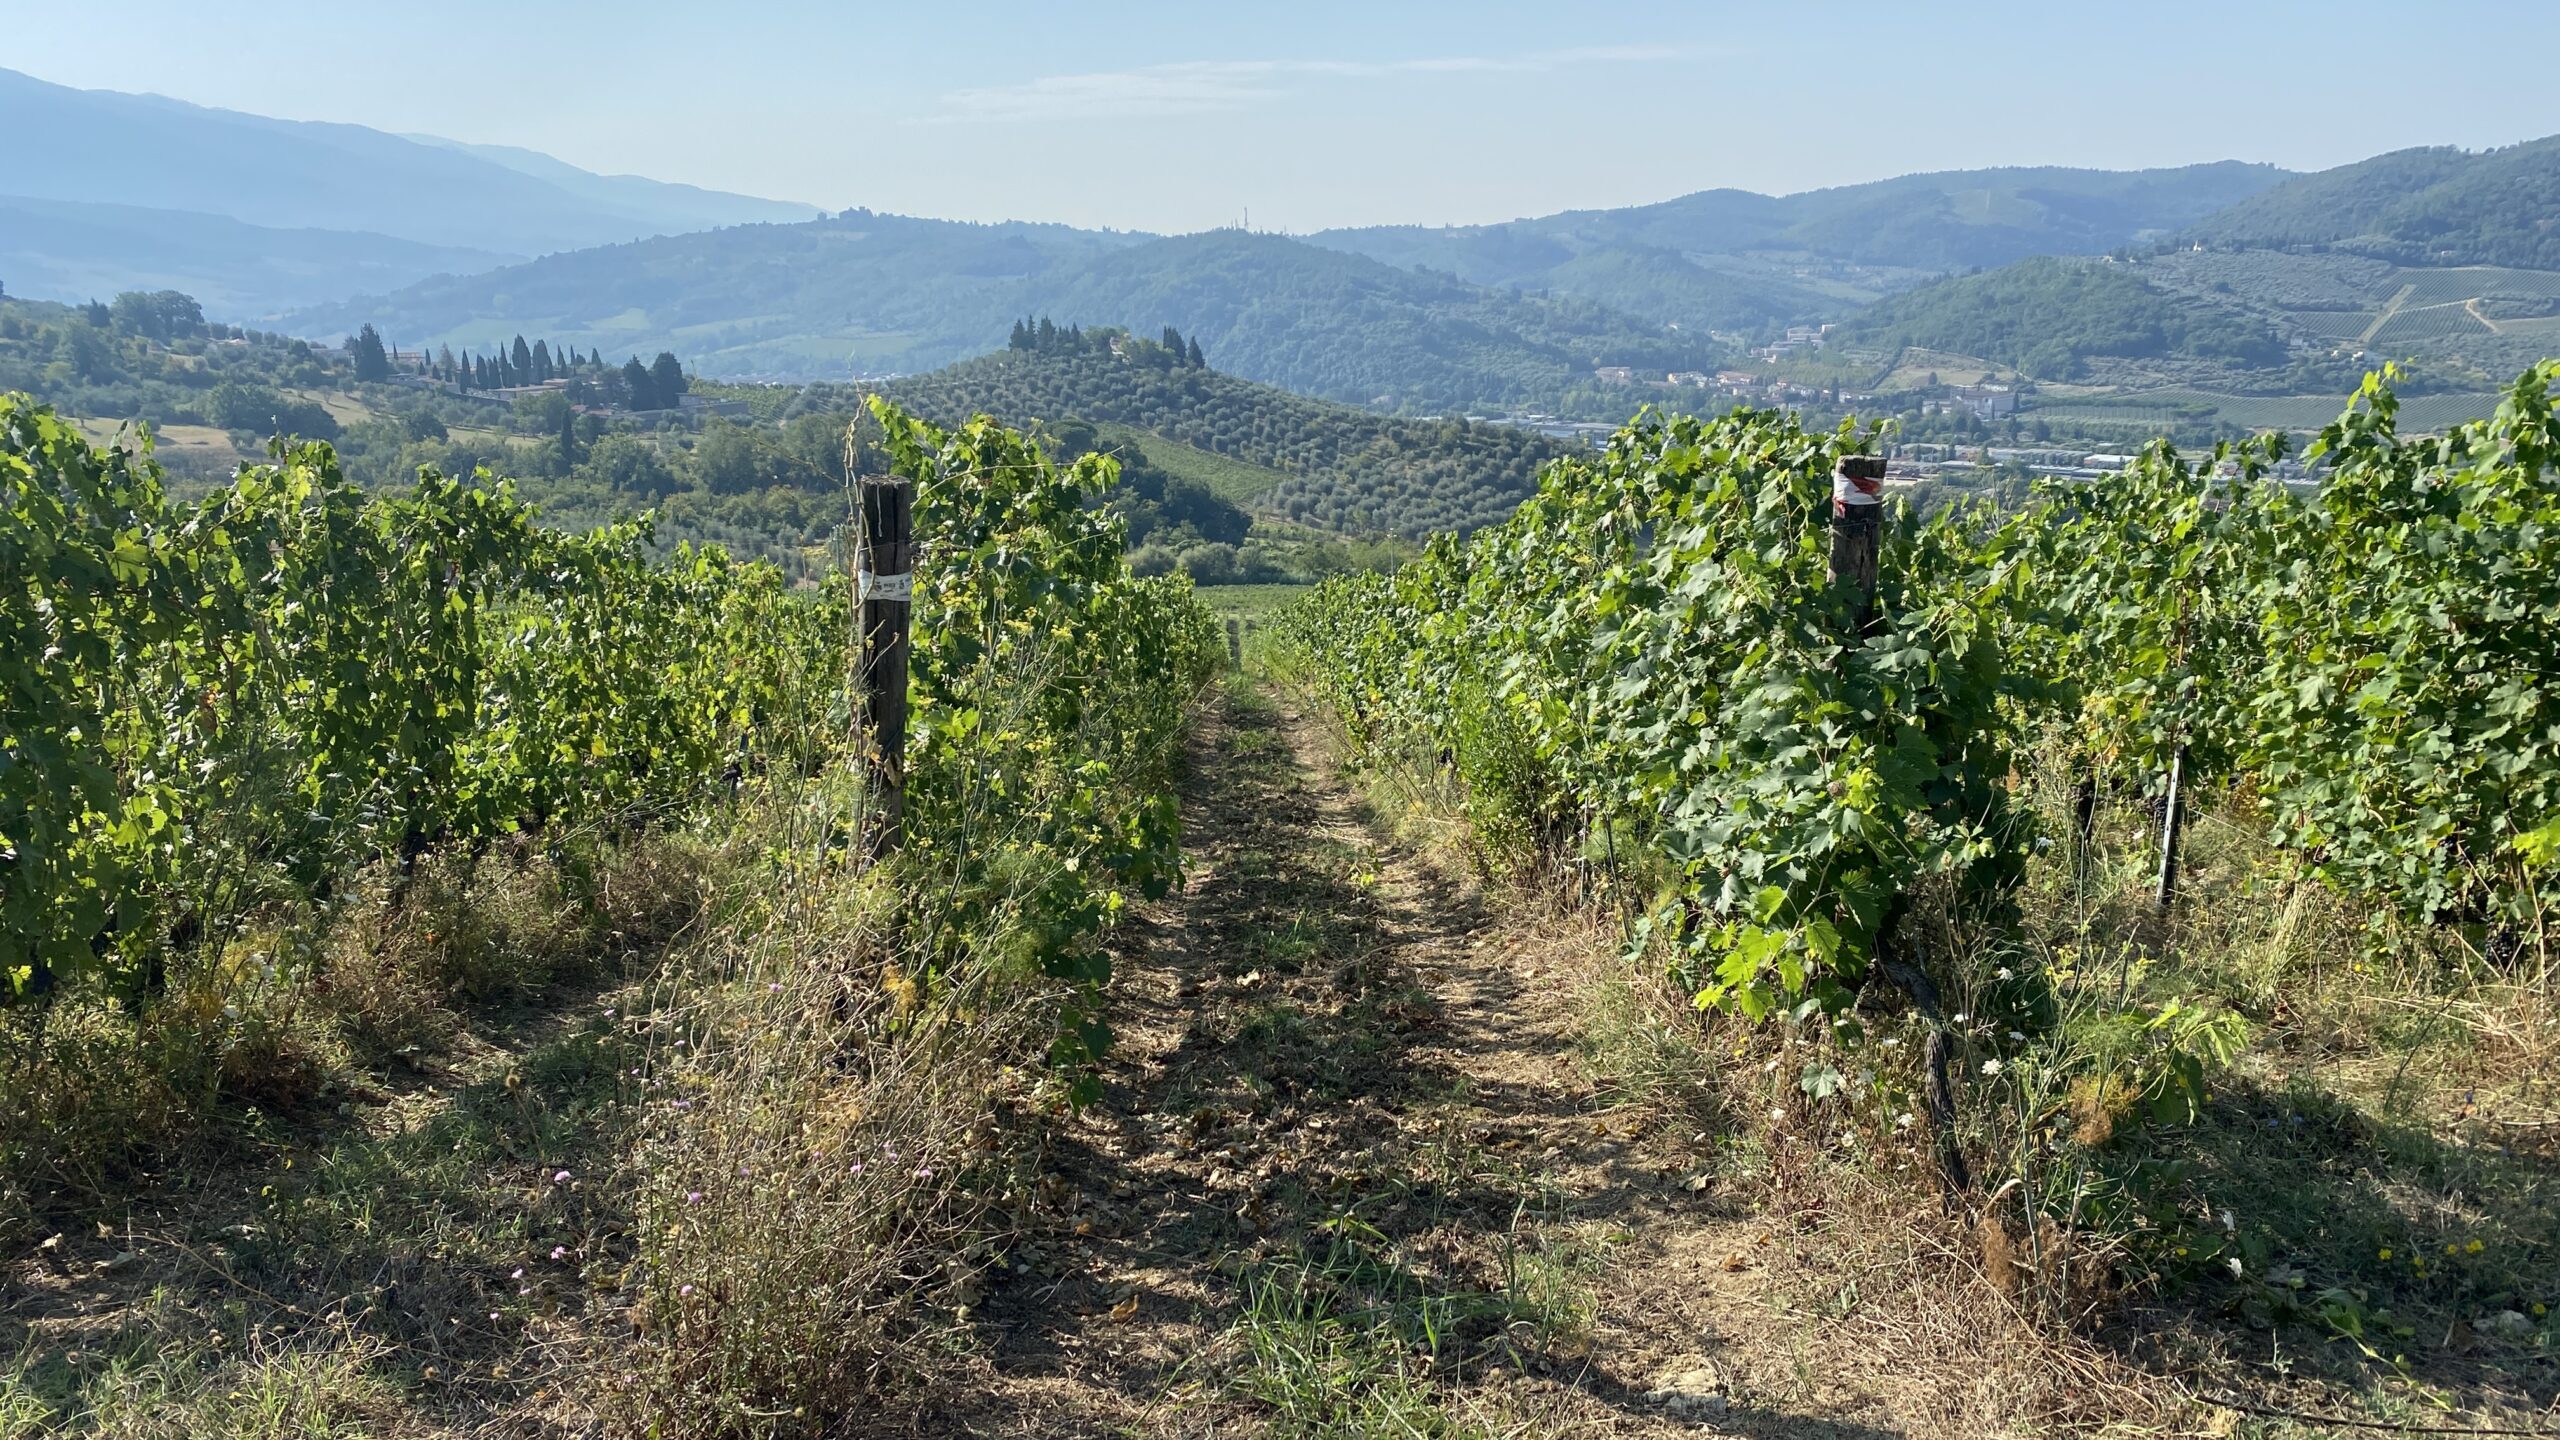 View from the ERCHI vineyard